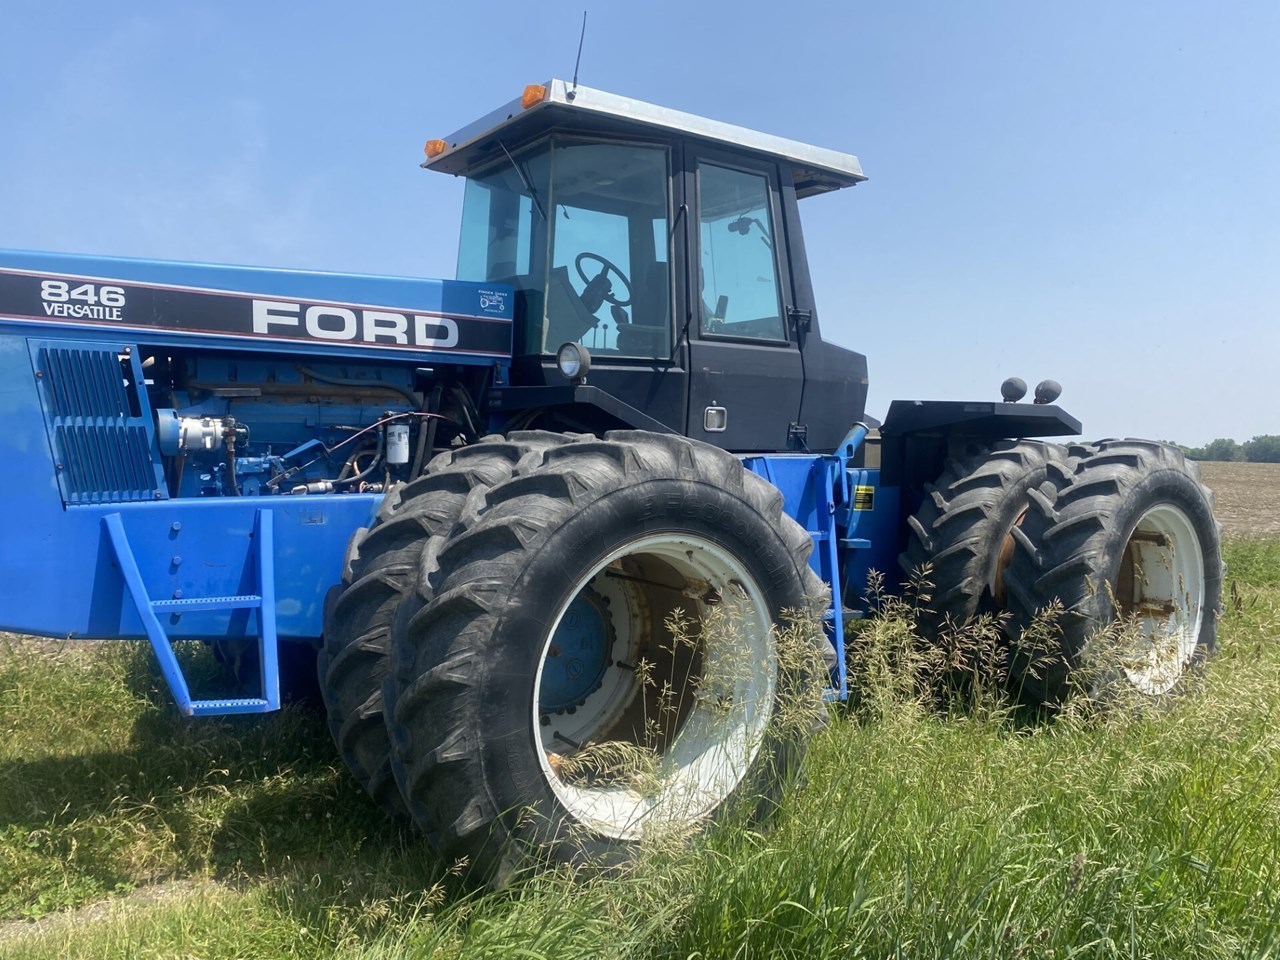 1993 Ford Versatile 846 Tractor - 4WD For Sale